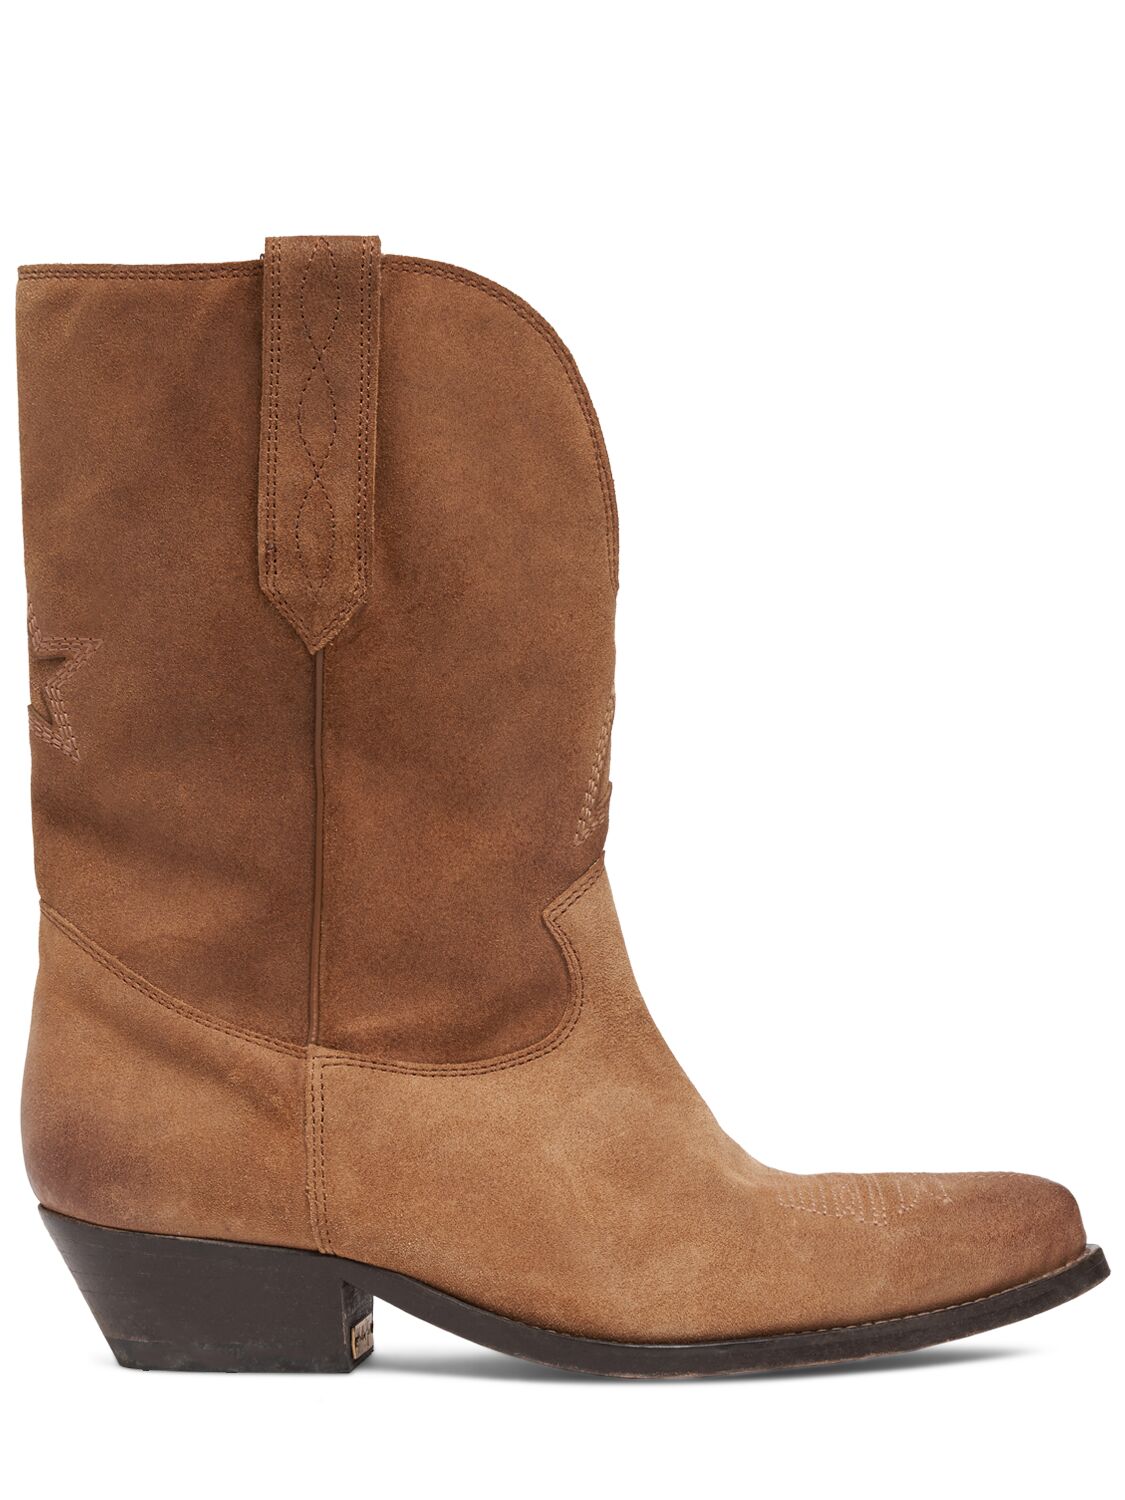 Shop Golden Goose 45mm Wish Star Suede Ankle Boots In Cognac